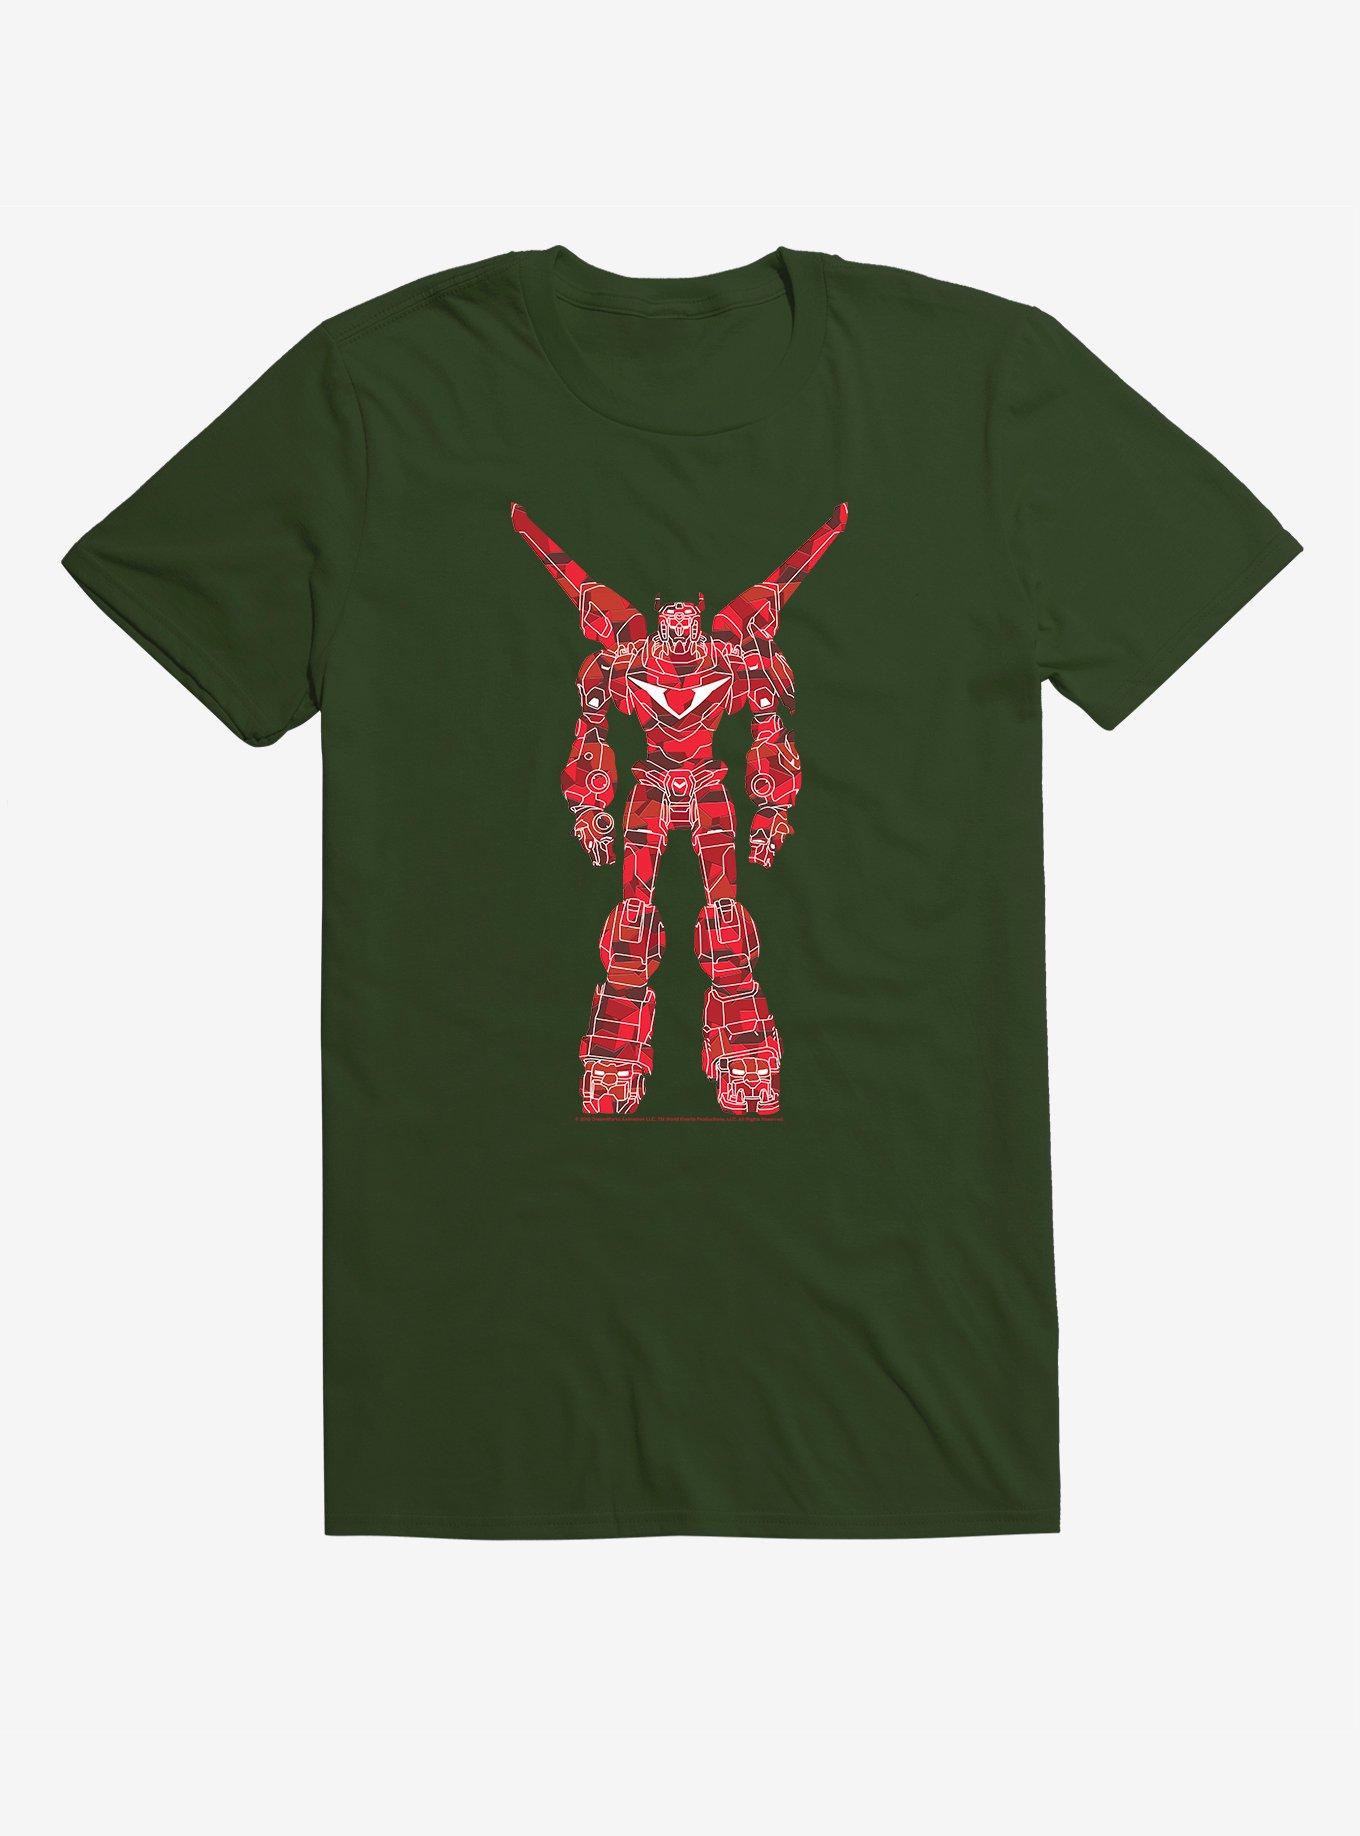 Voltron Red Patchy Robot T-Shirt, CITY GREEN, hi-res